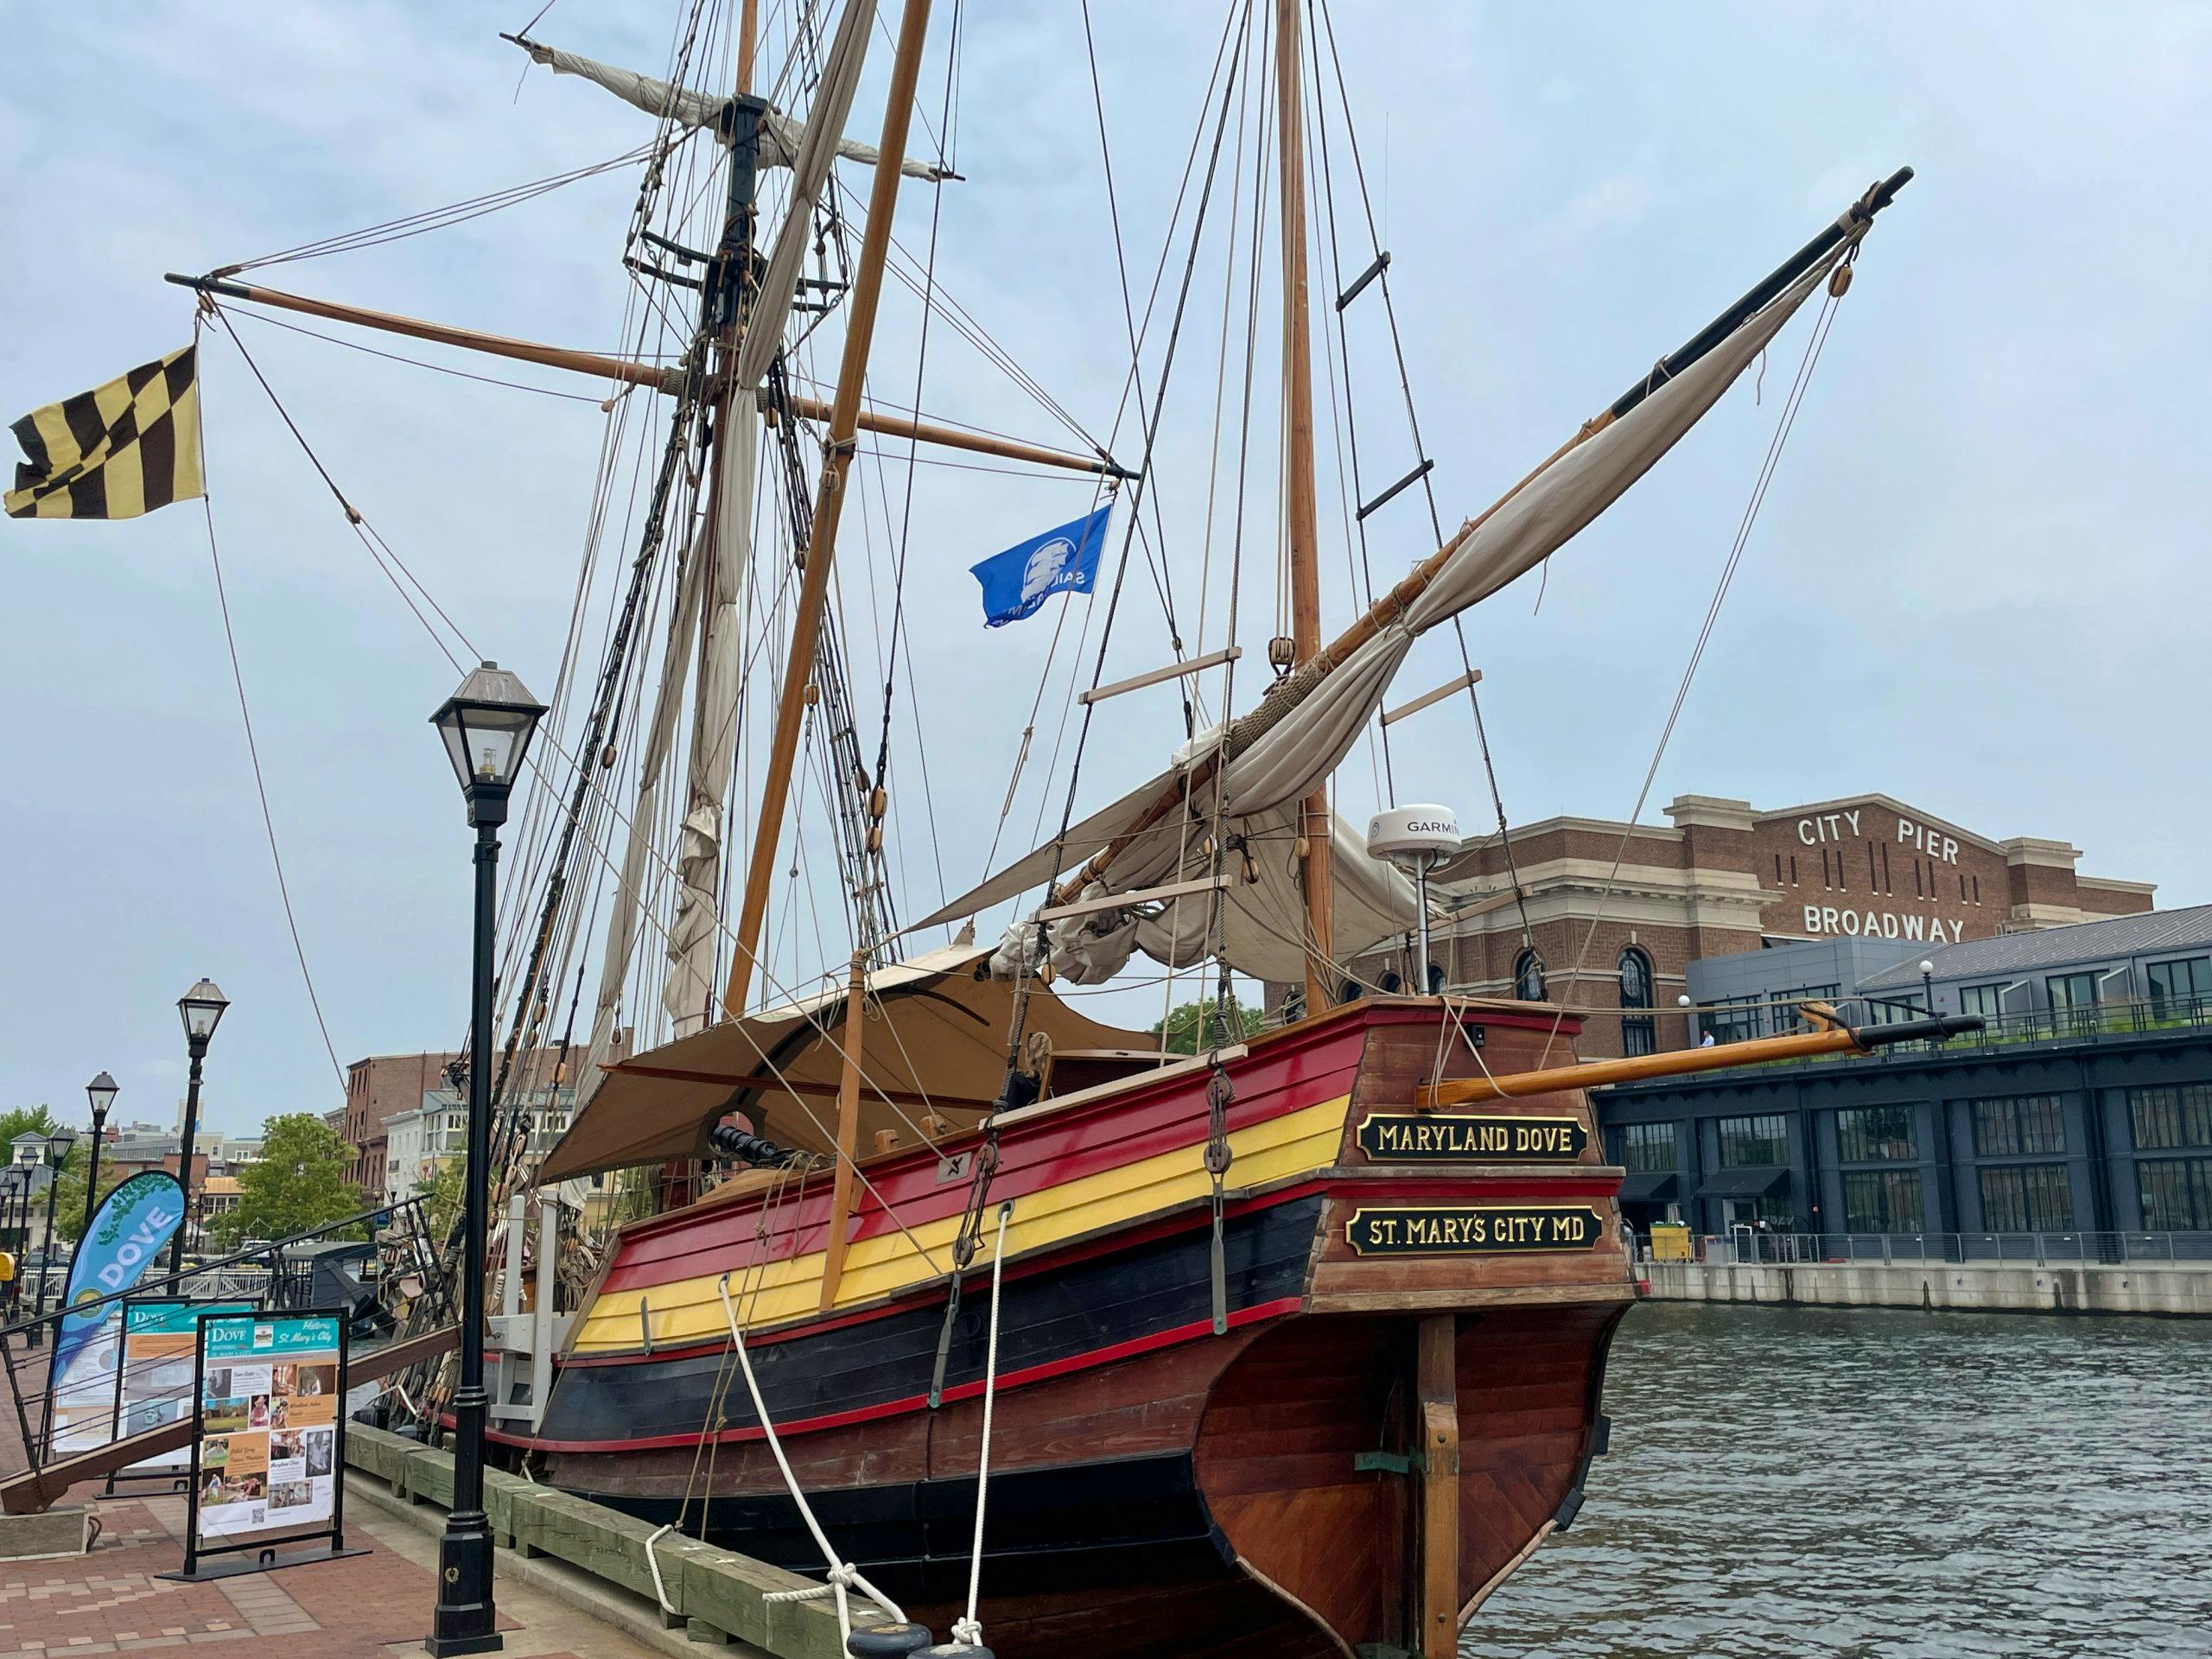 WMAR NEWS2-Baltimore (video) Maryland Dove docked in Fells Point